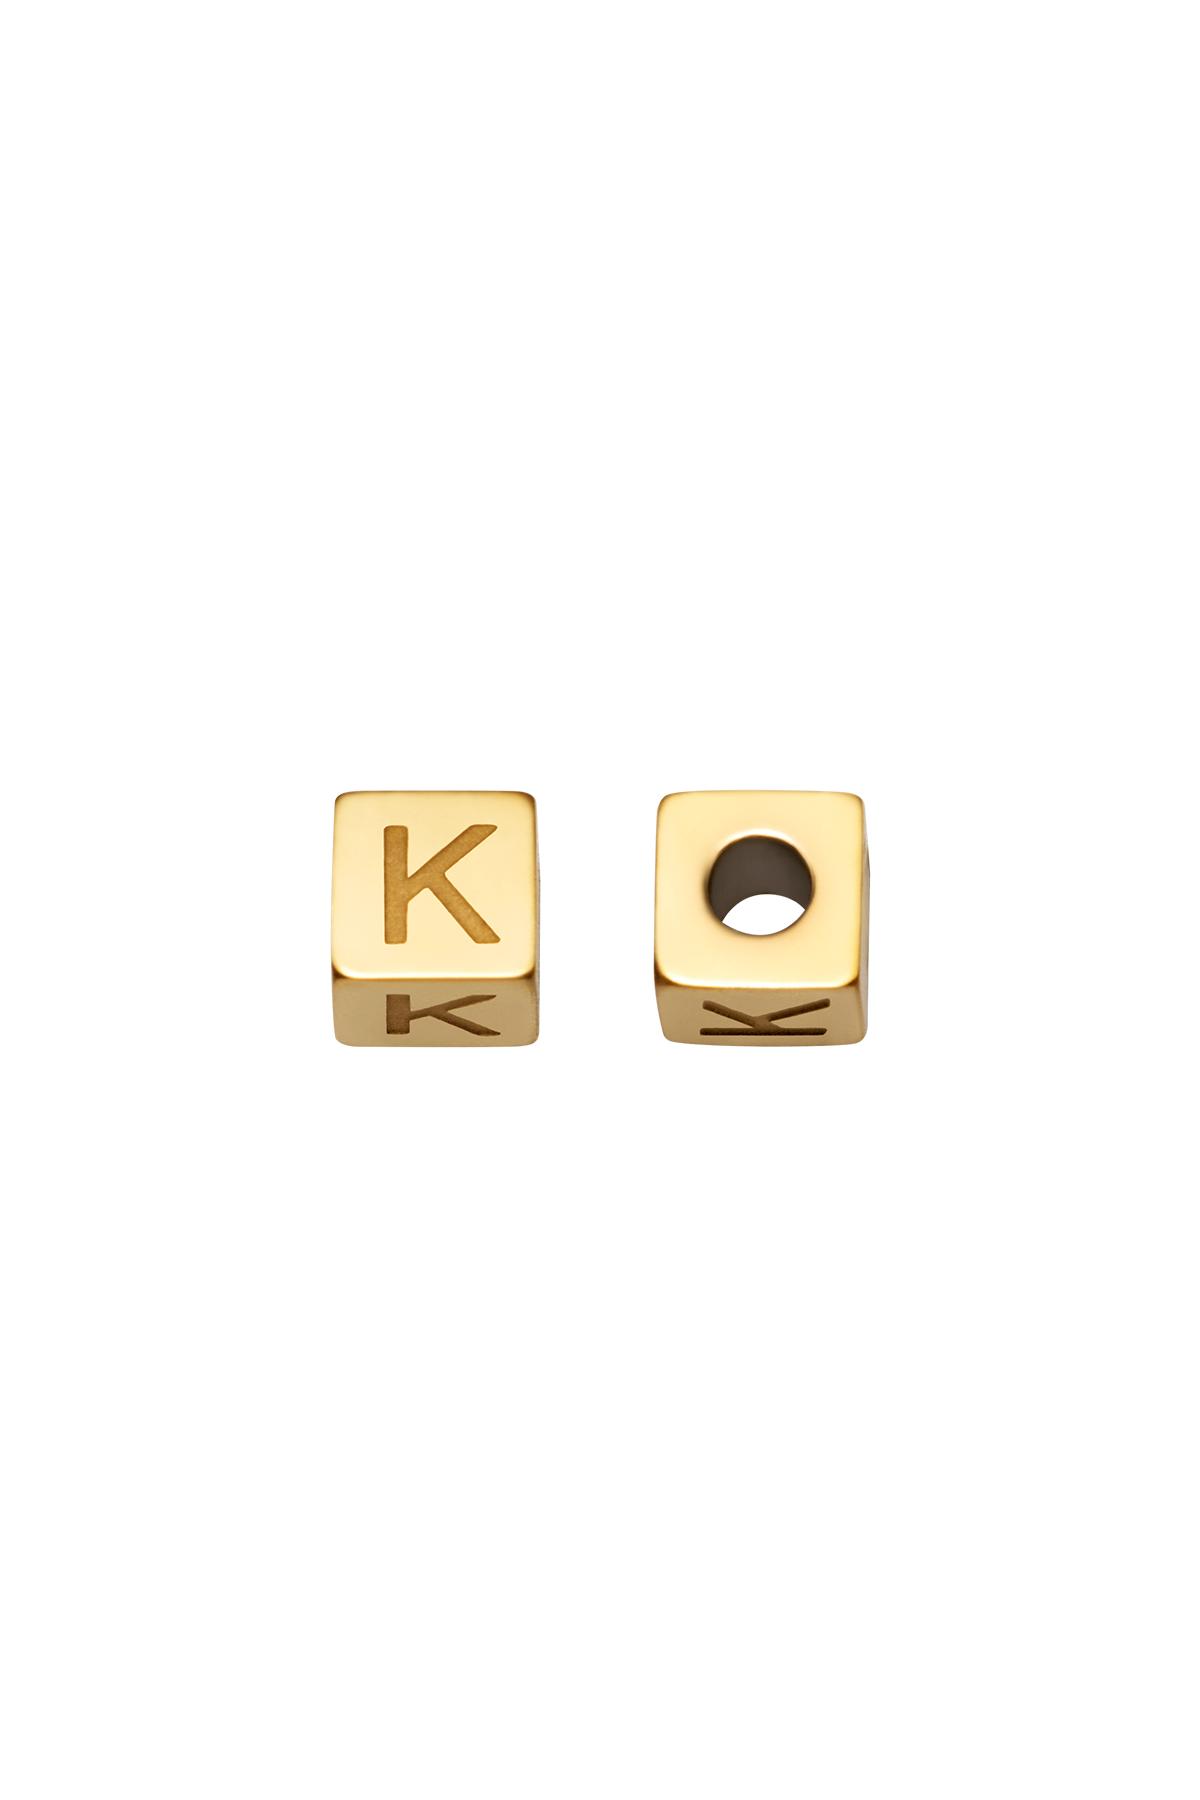 Gold / DIY Beads Alphabet Gold K Stainless Steel Picture20